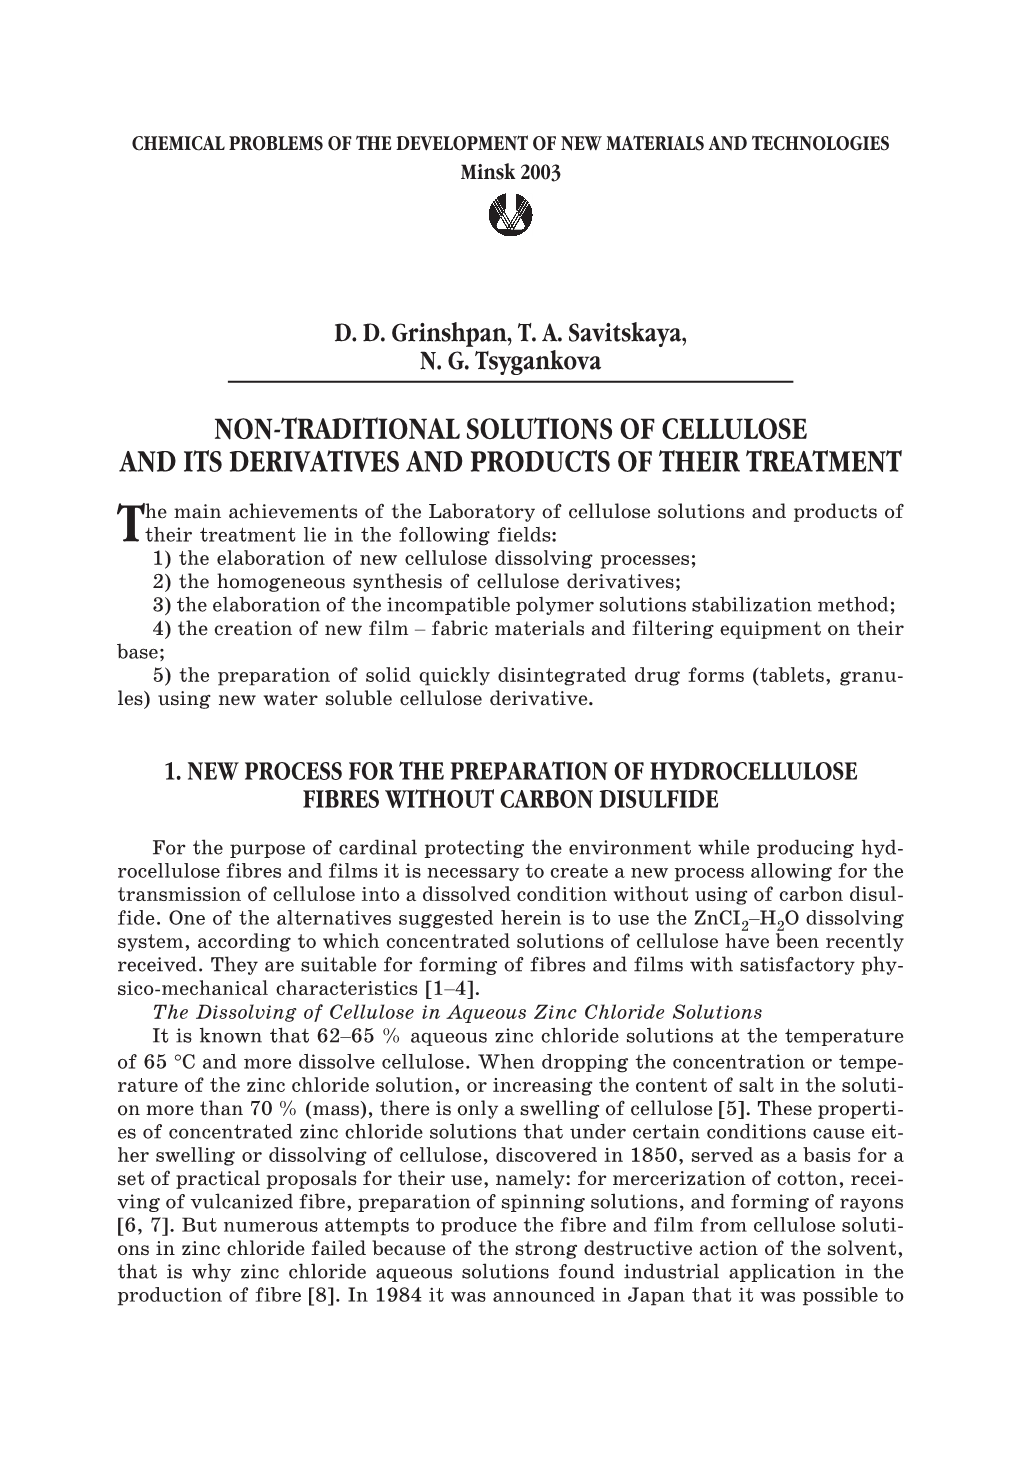 Non-Traditional Solutions of Cellulose and Its Derivatives and Products of Their Treatment